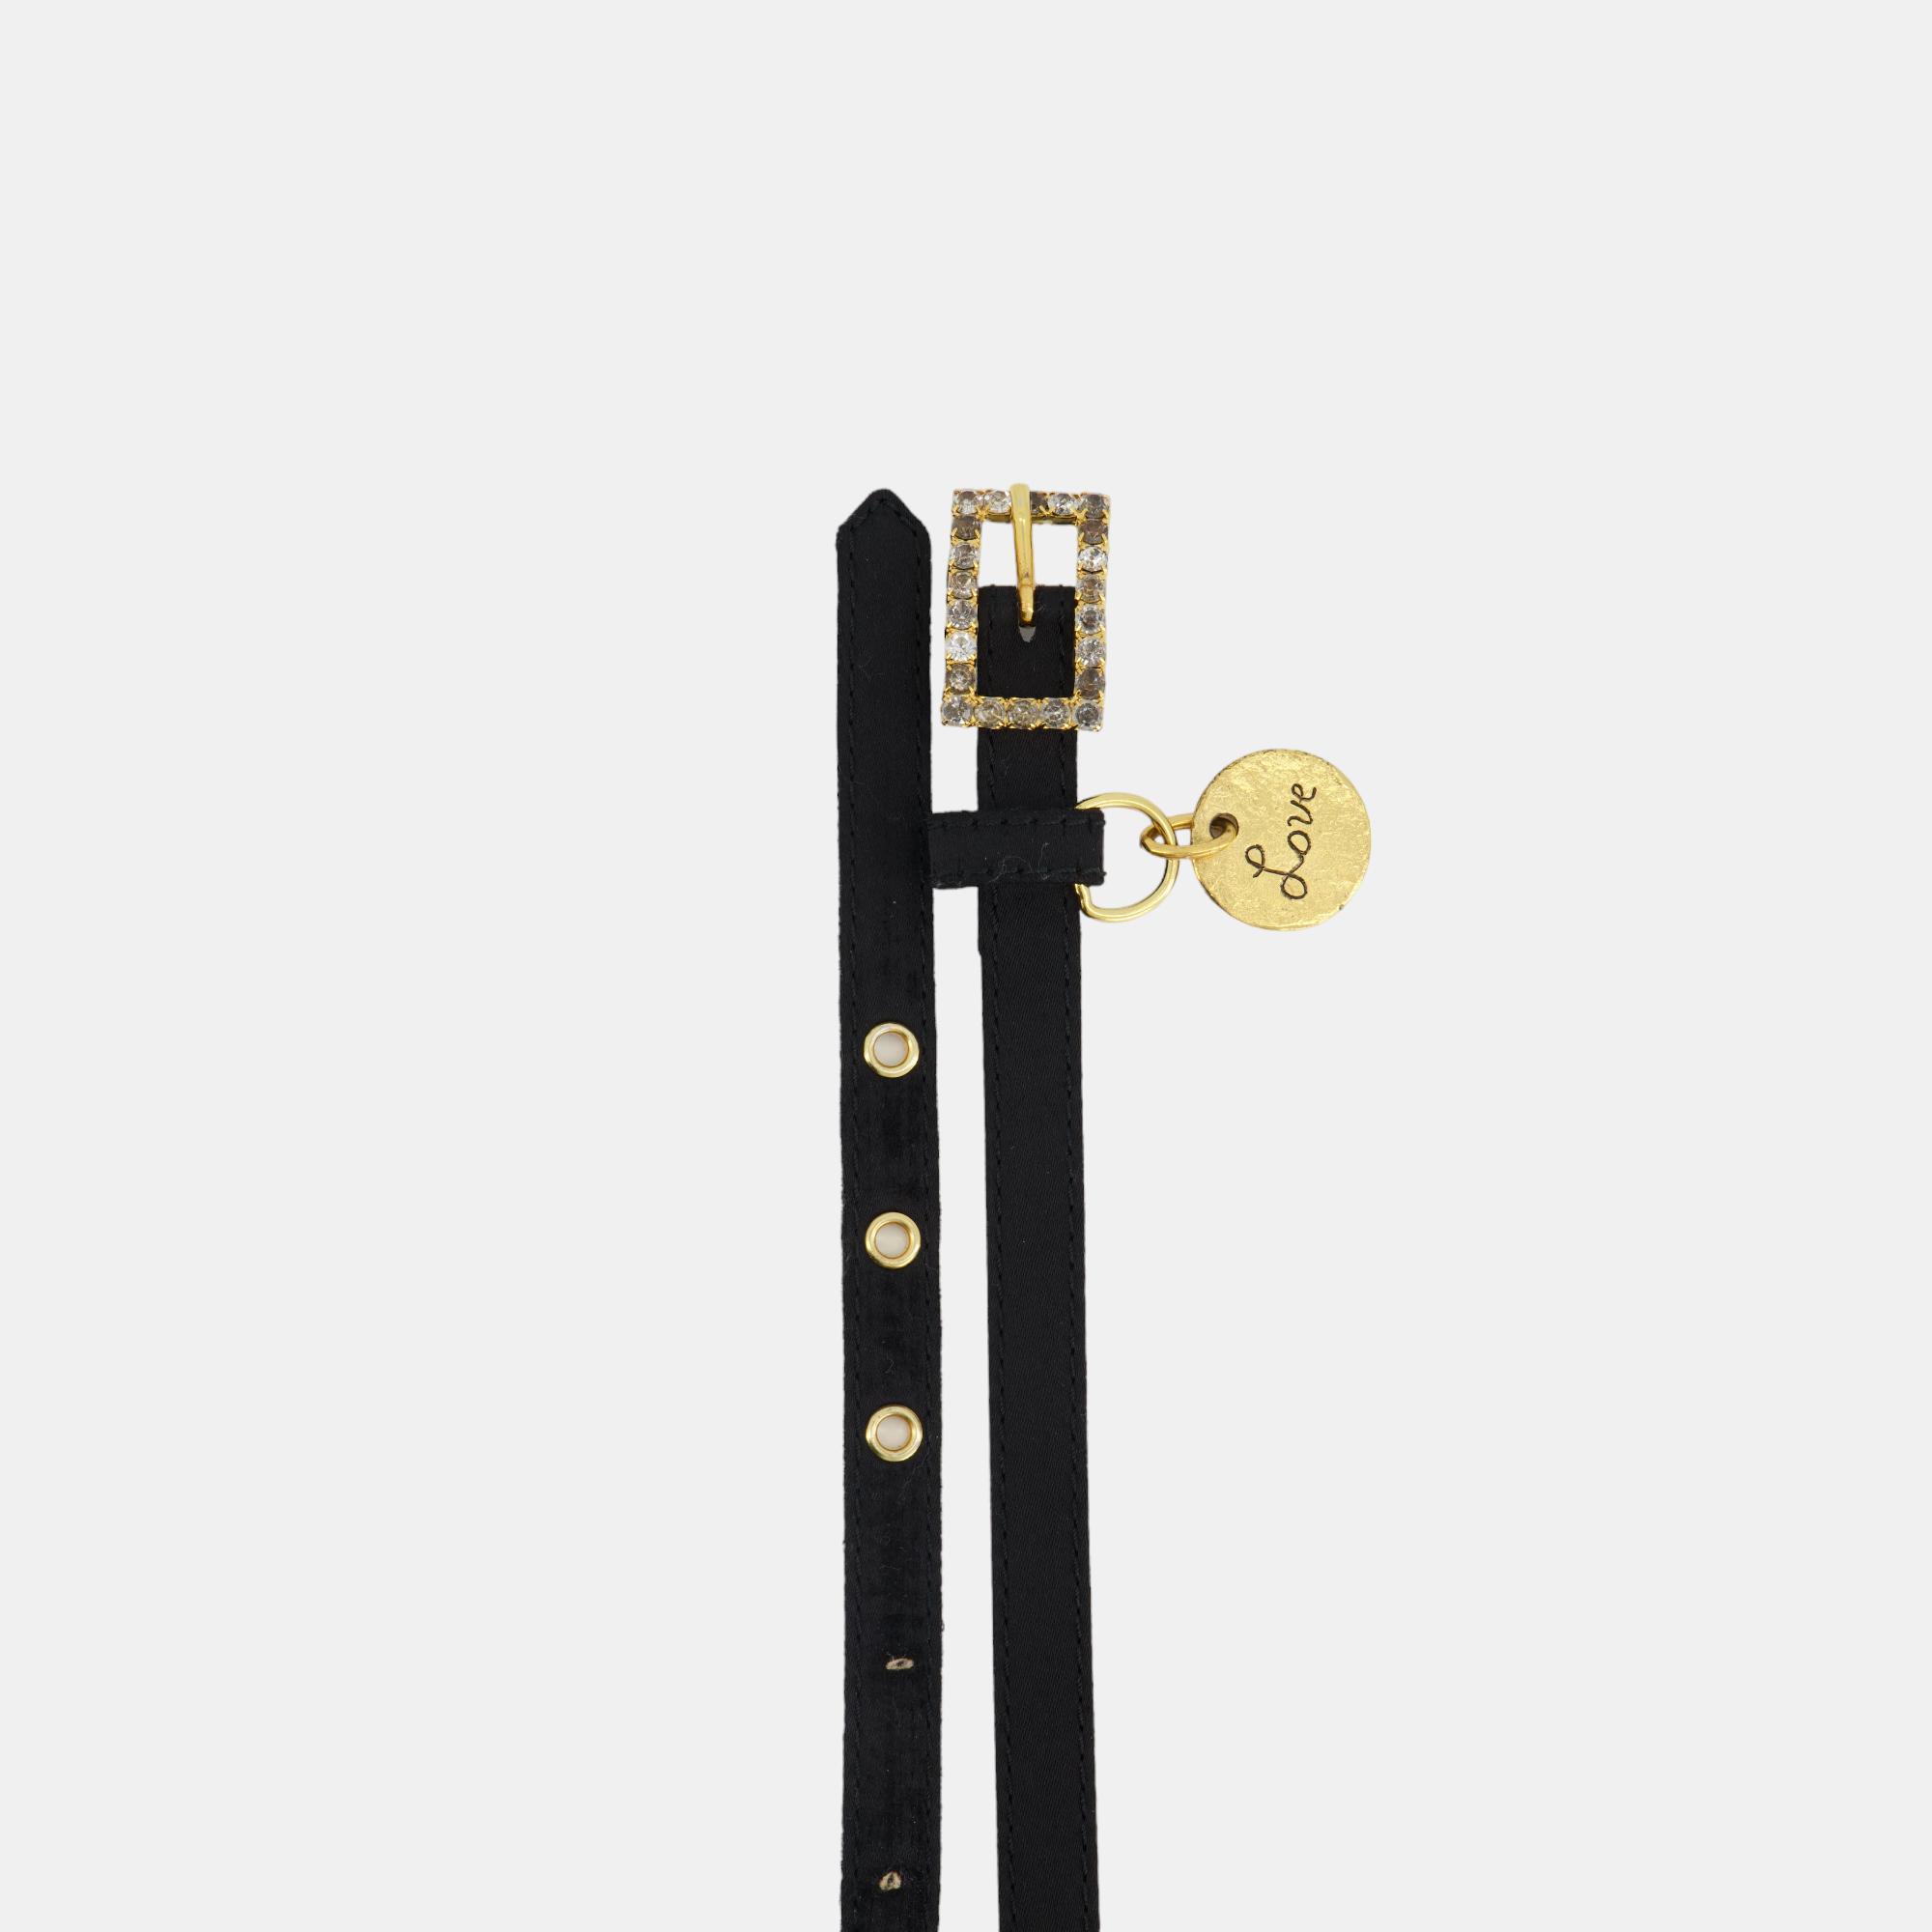 Yves Saint Laurent Vintage Black Belt With Crystal Buckle And Love Coin Detail 80cm